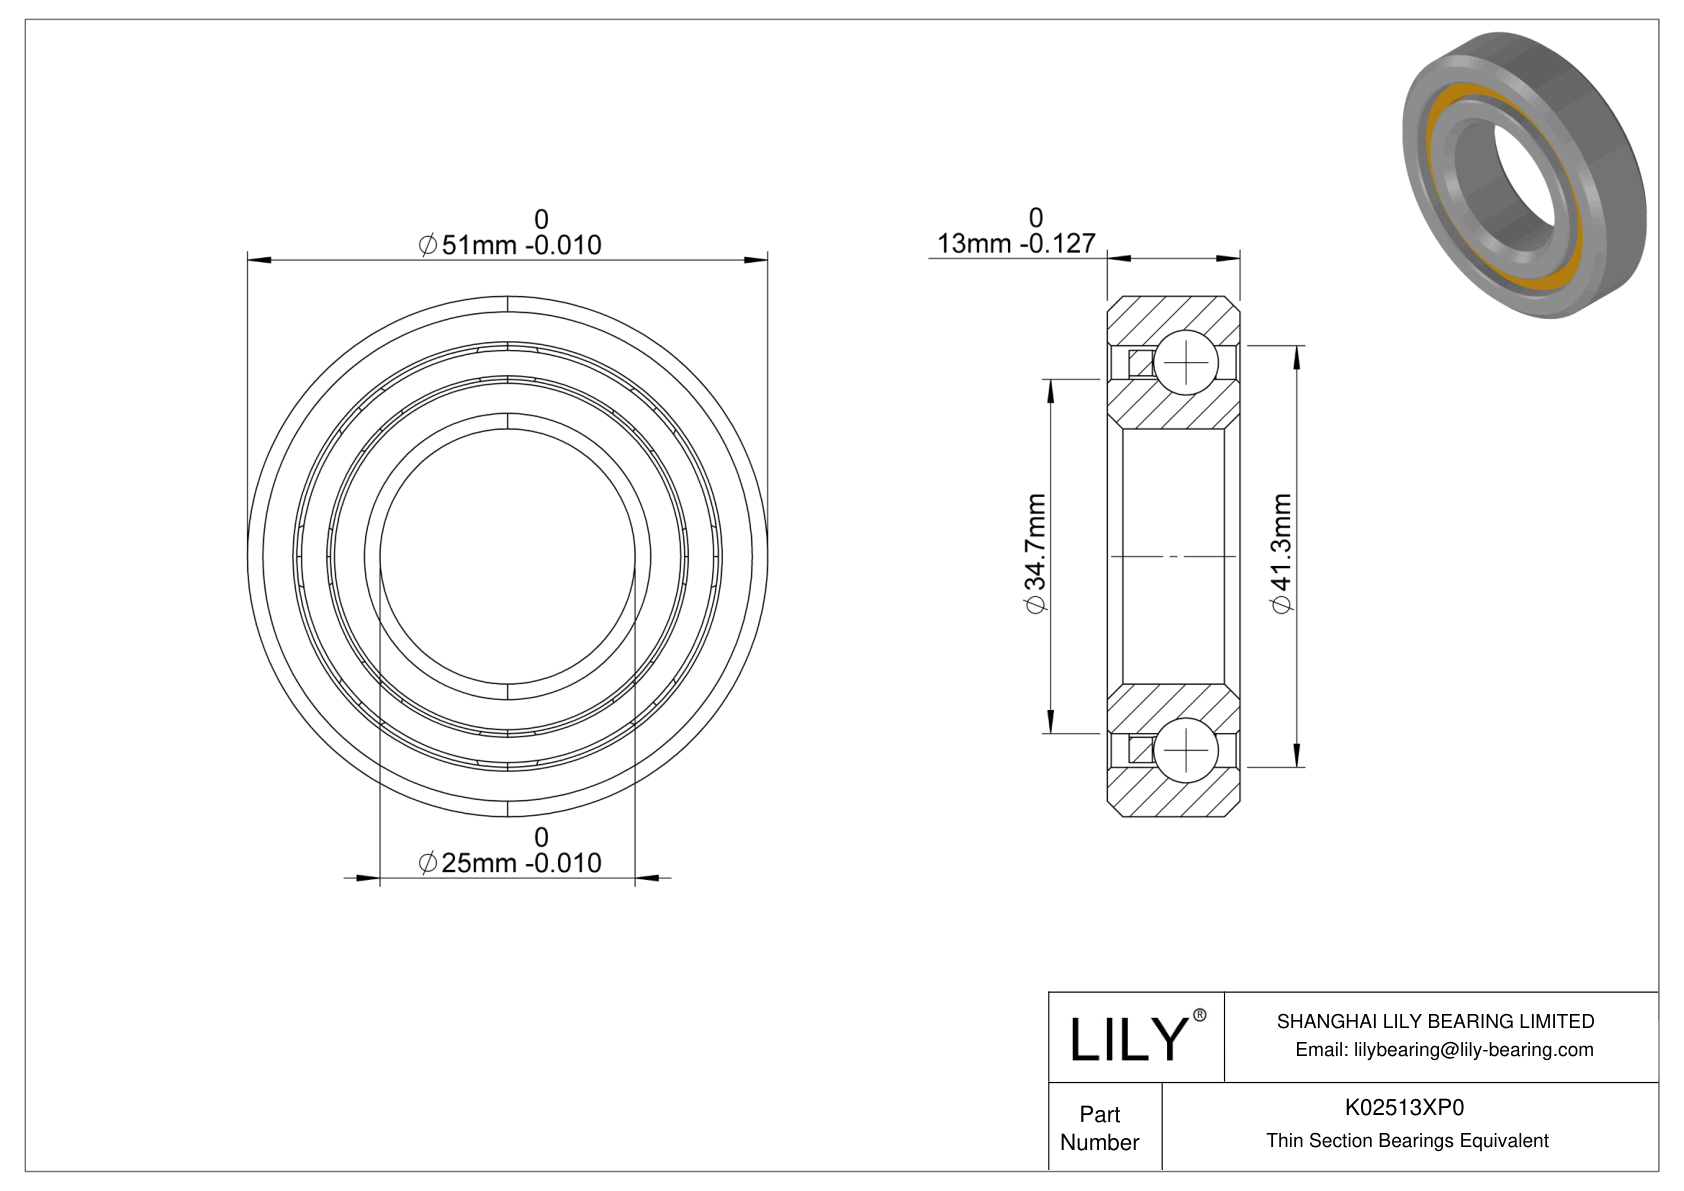 K02513XP0 Constant Section (CS) Bearings cad drawing